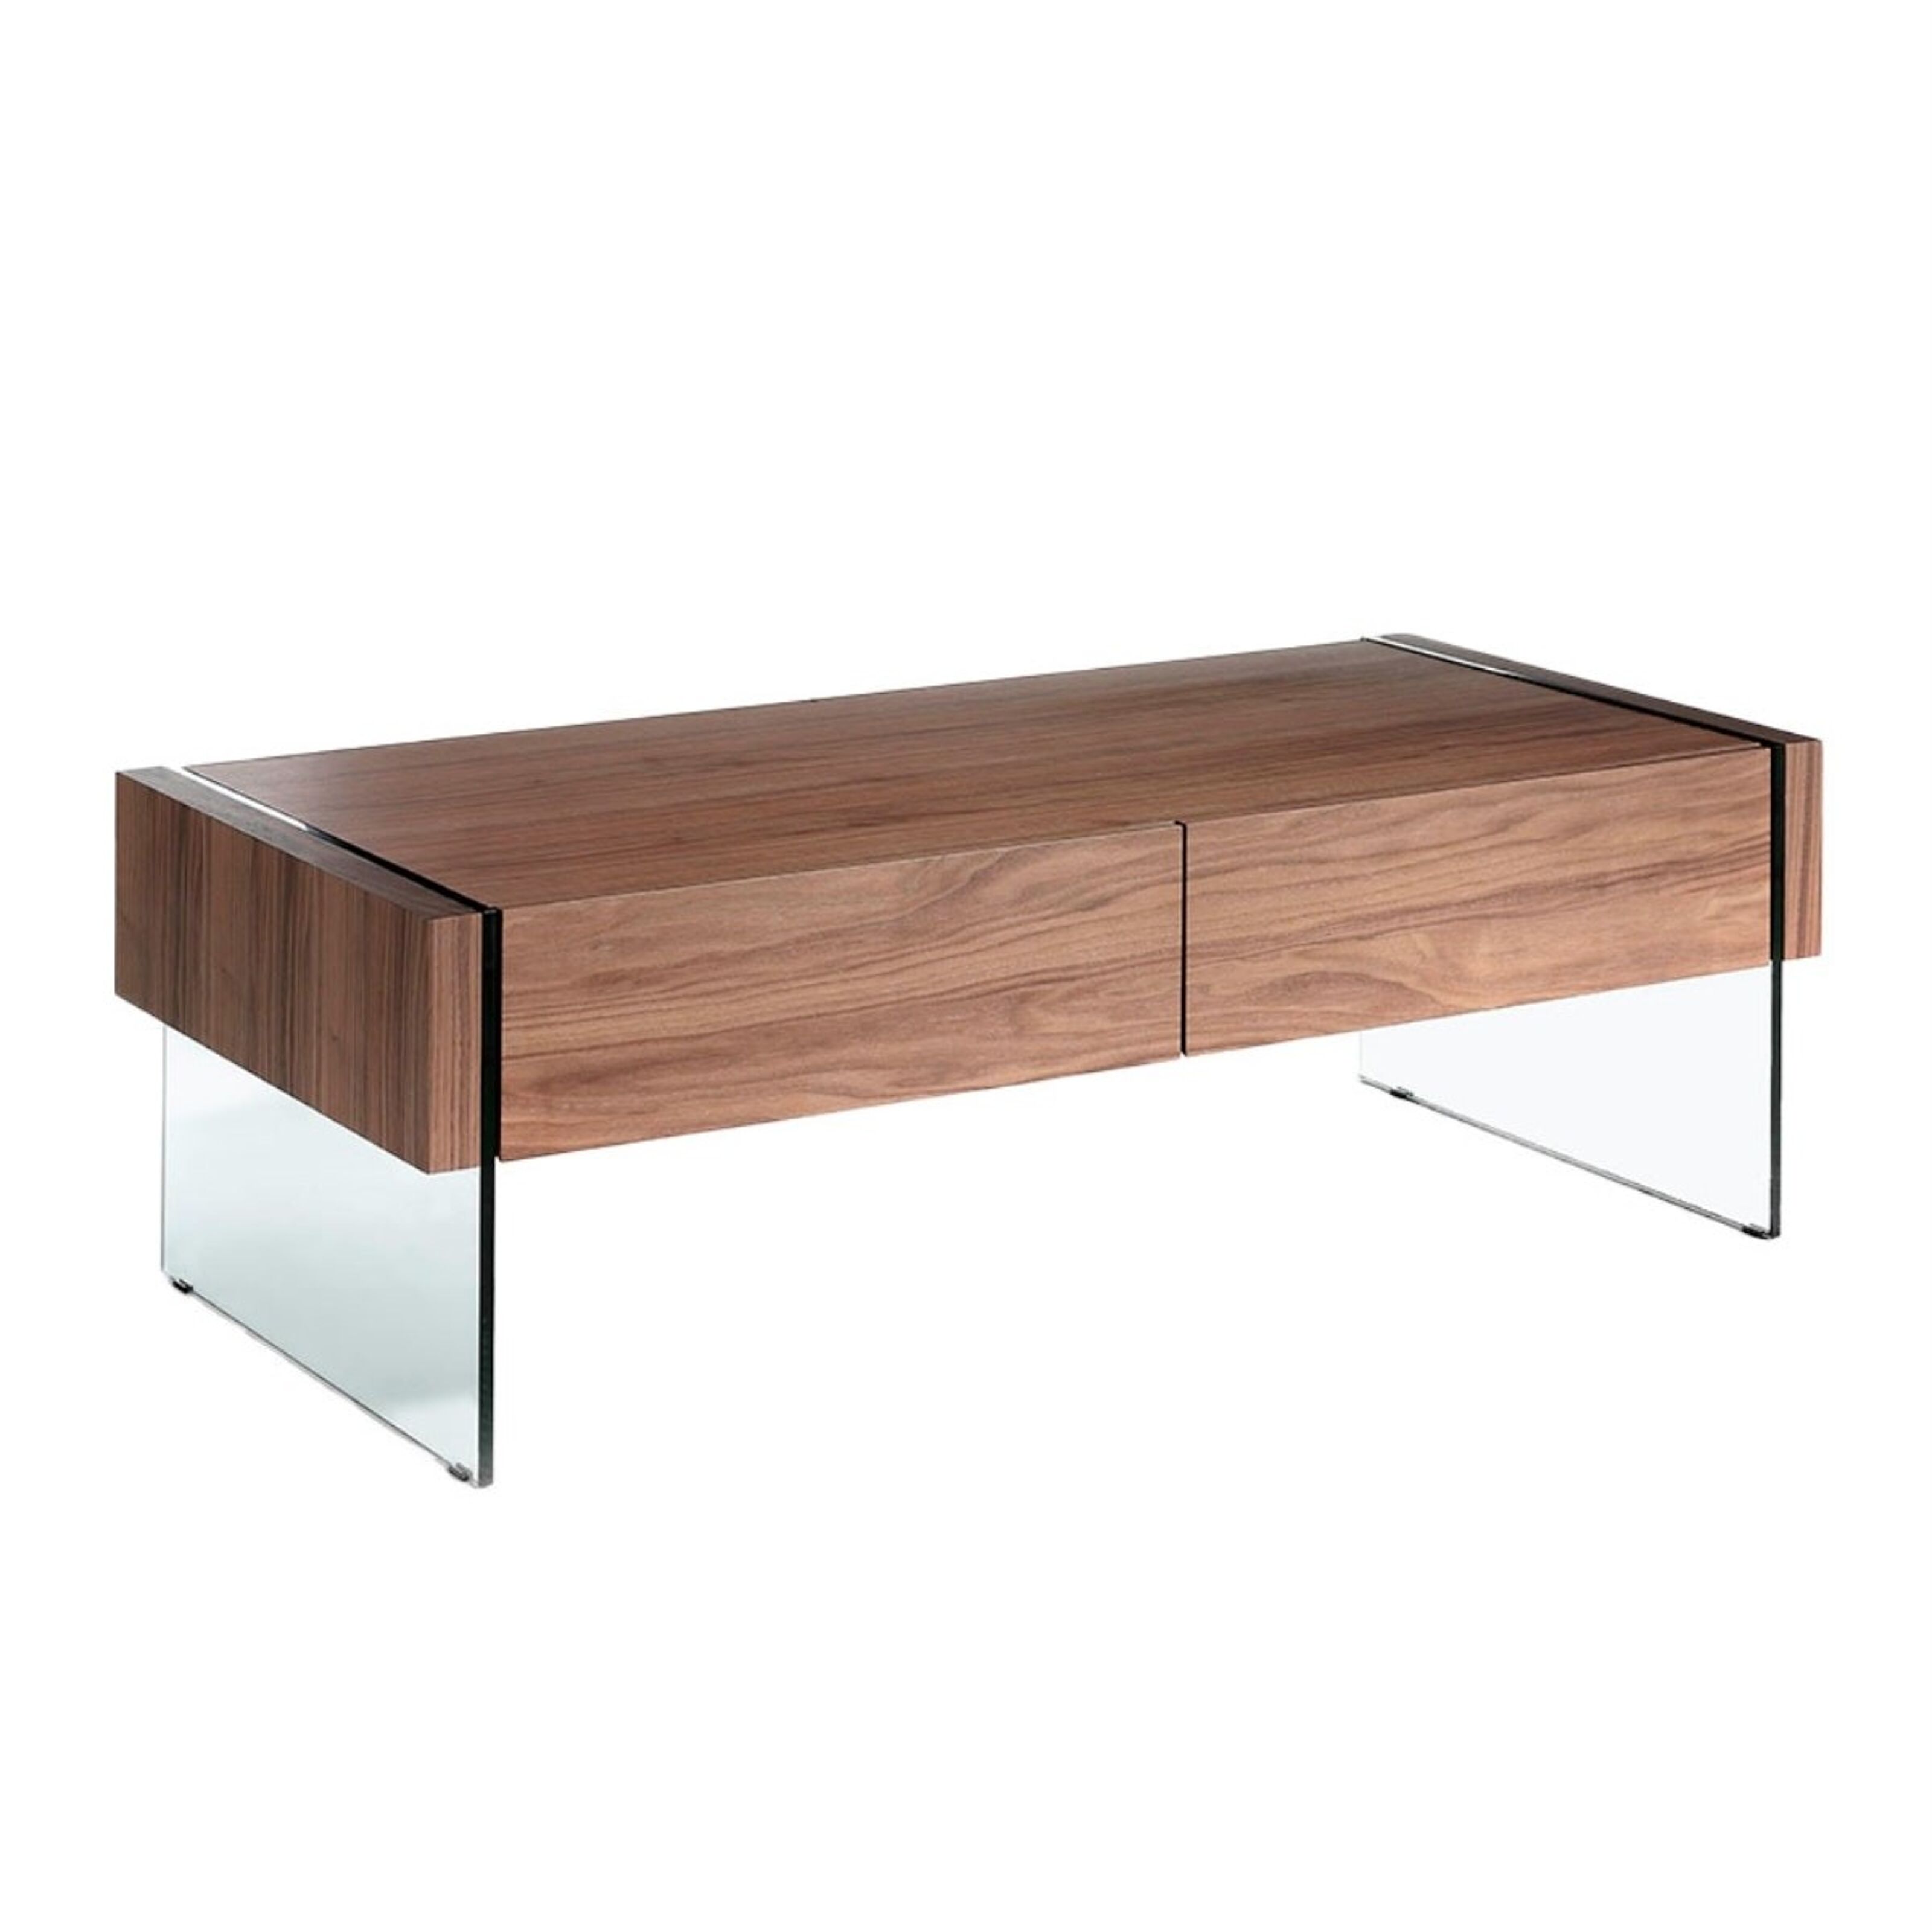 Buy wholesale Walnut veneered wood table with tempered drawers, center sides model glass 2050 and